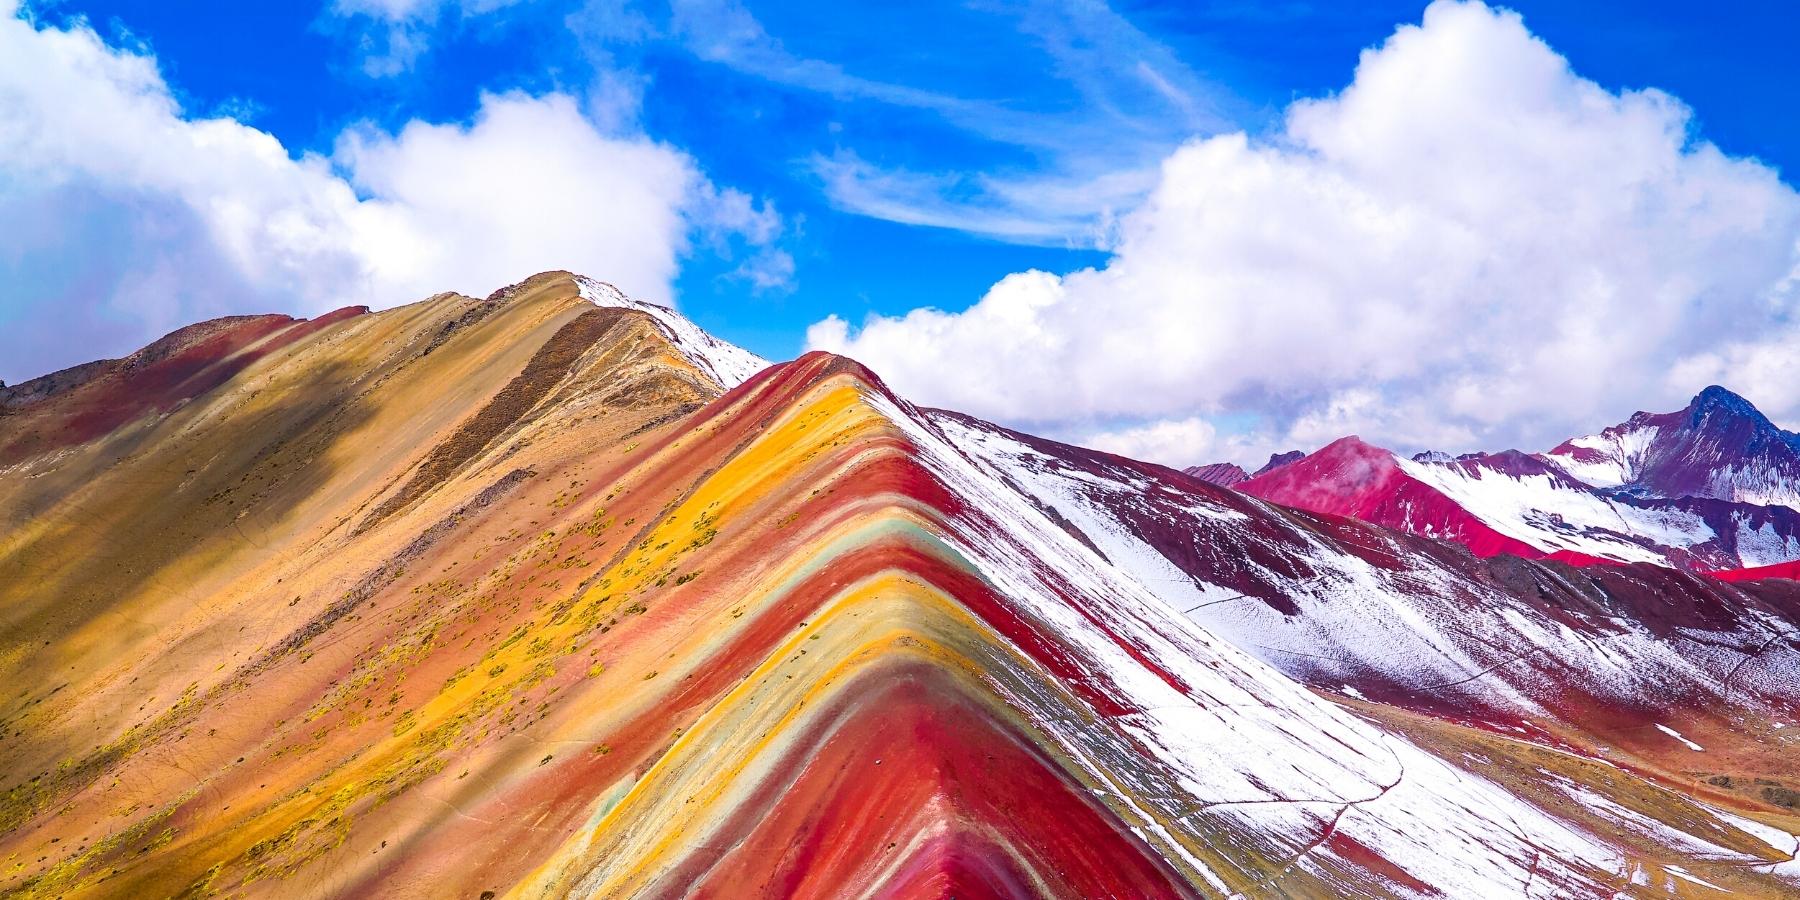 vinicunca rainbow mountain by inca trail expeditions (1)